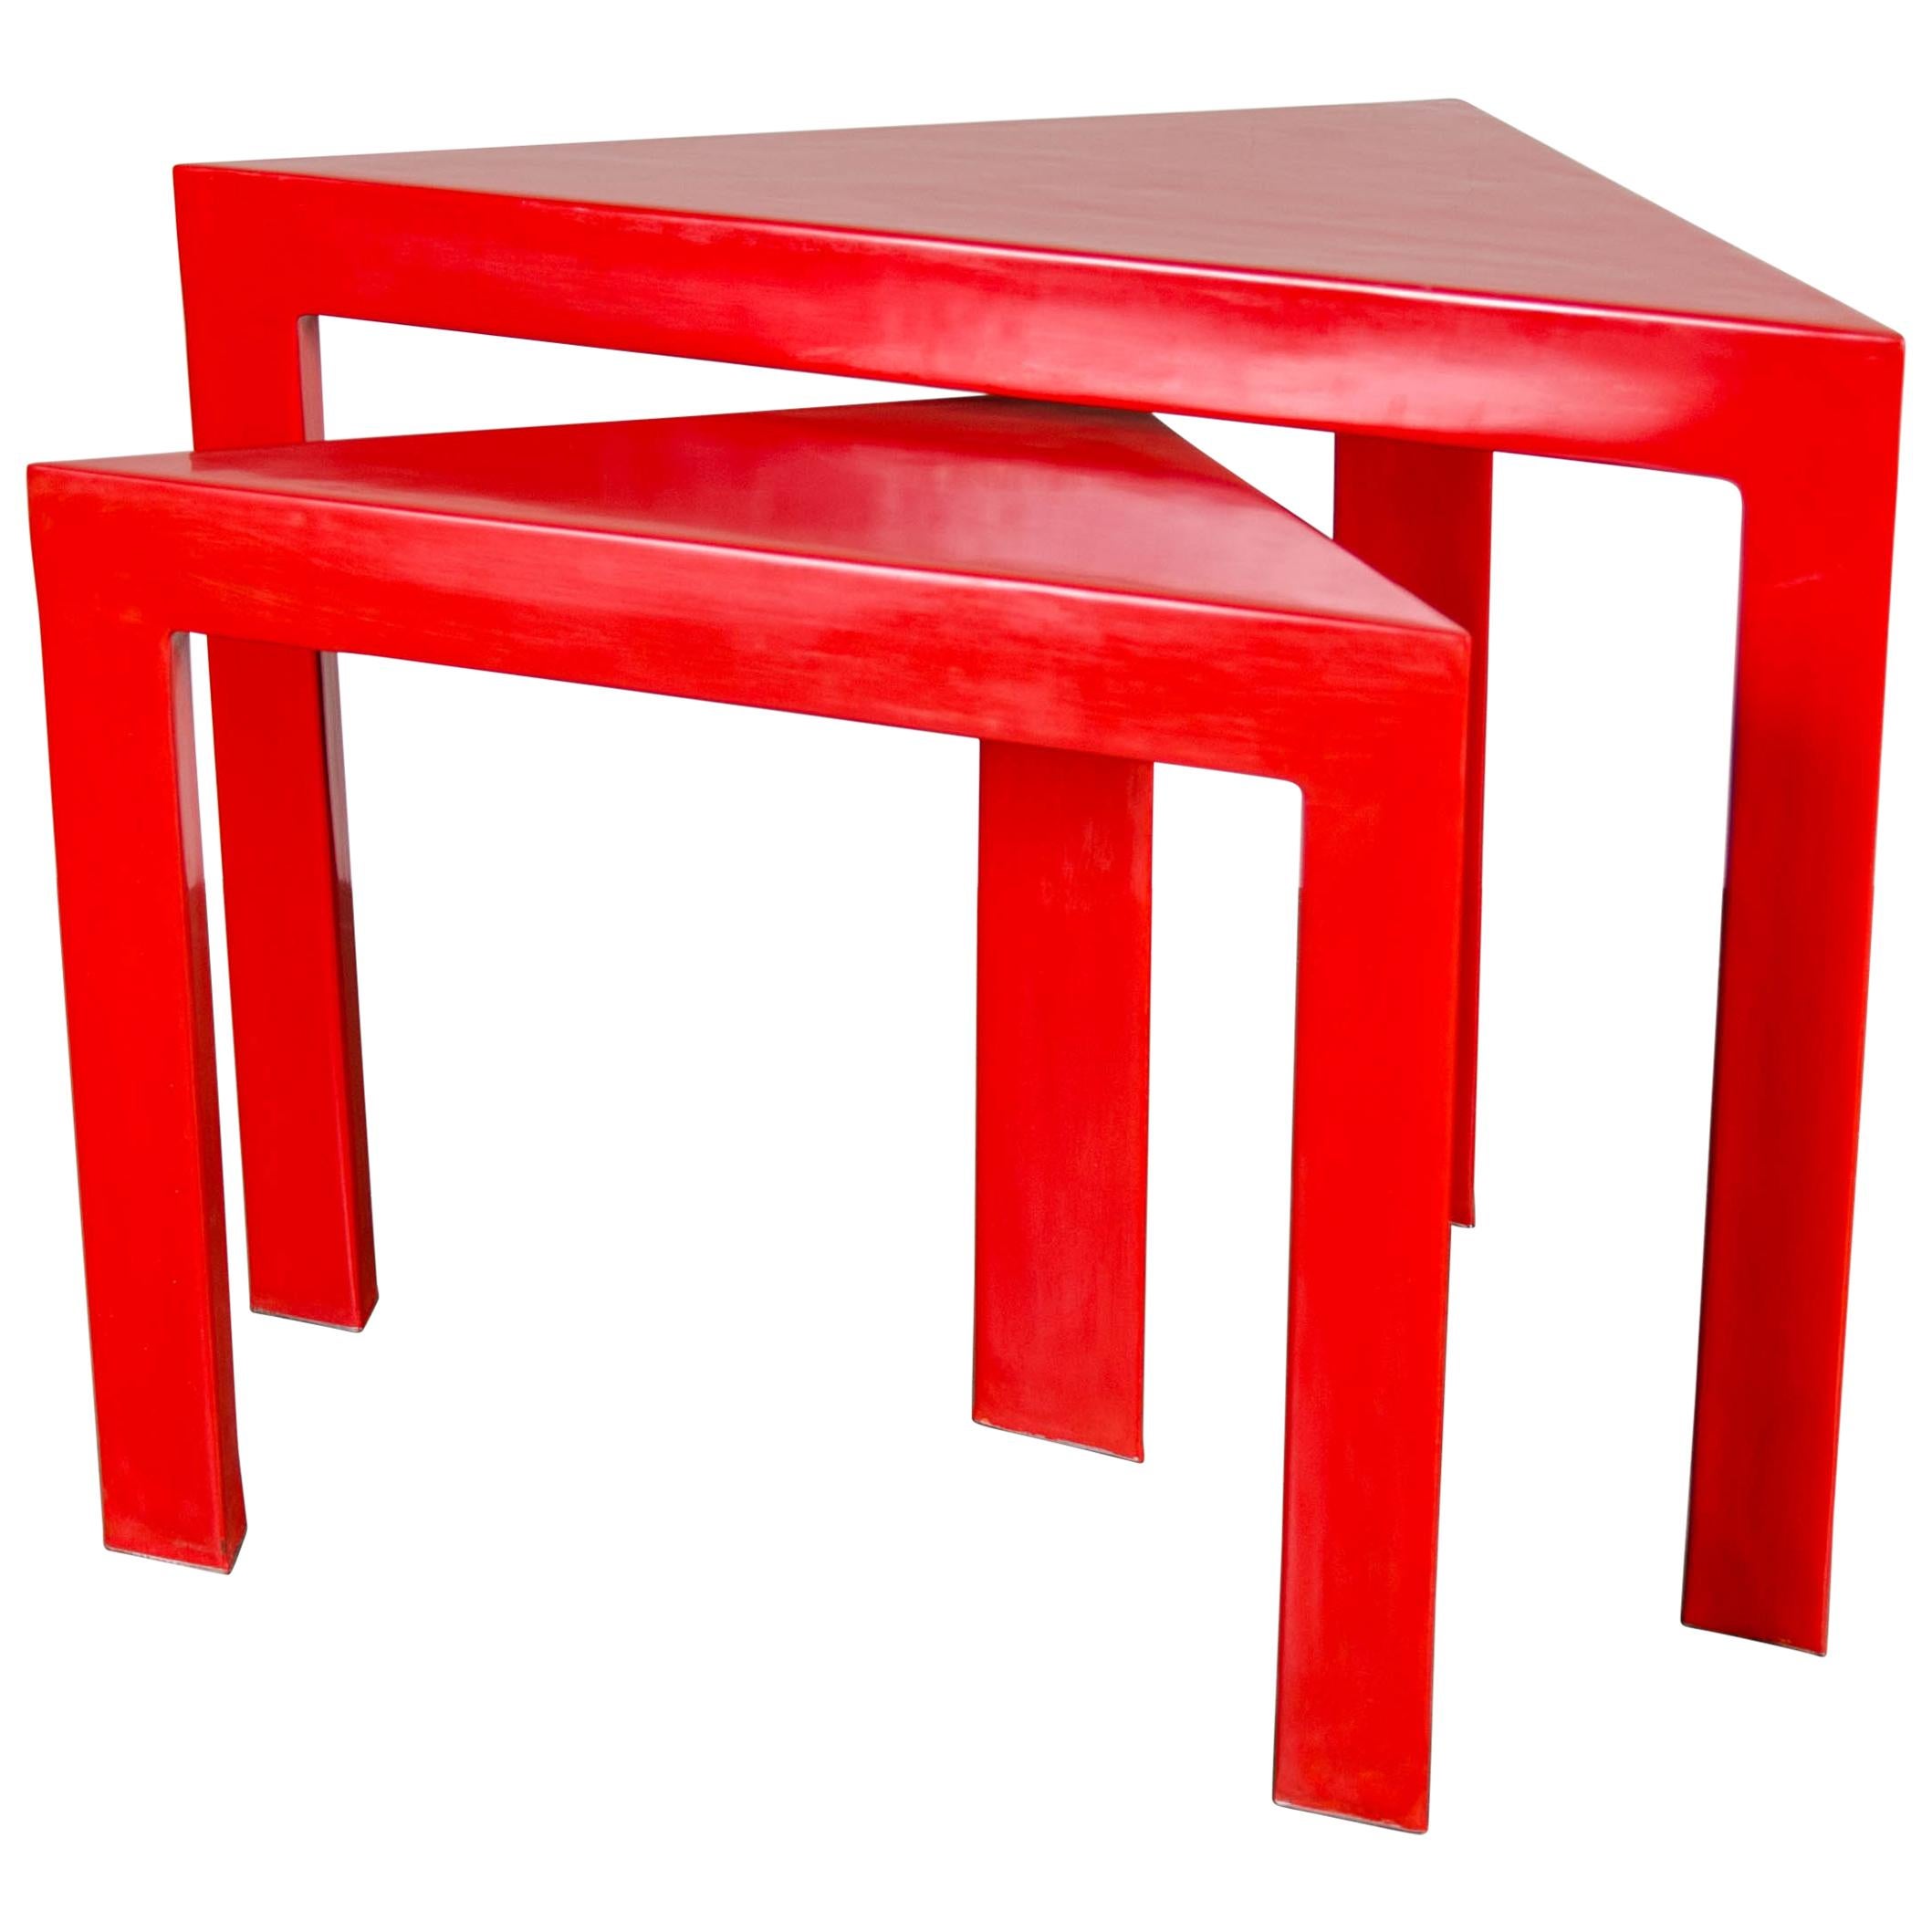 Corner Nesting Table, Red Lacquer by Robert Kuo, Set of 2, Limited Edition For Sale